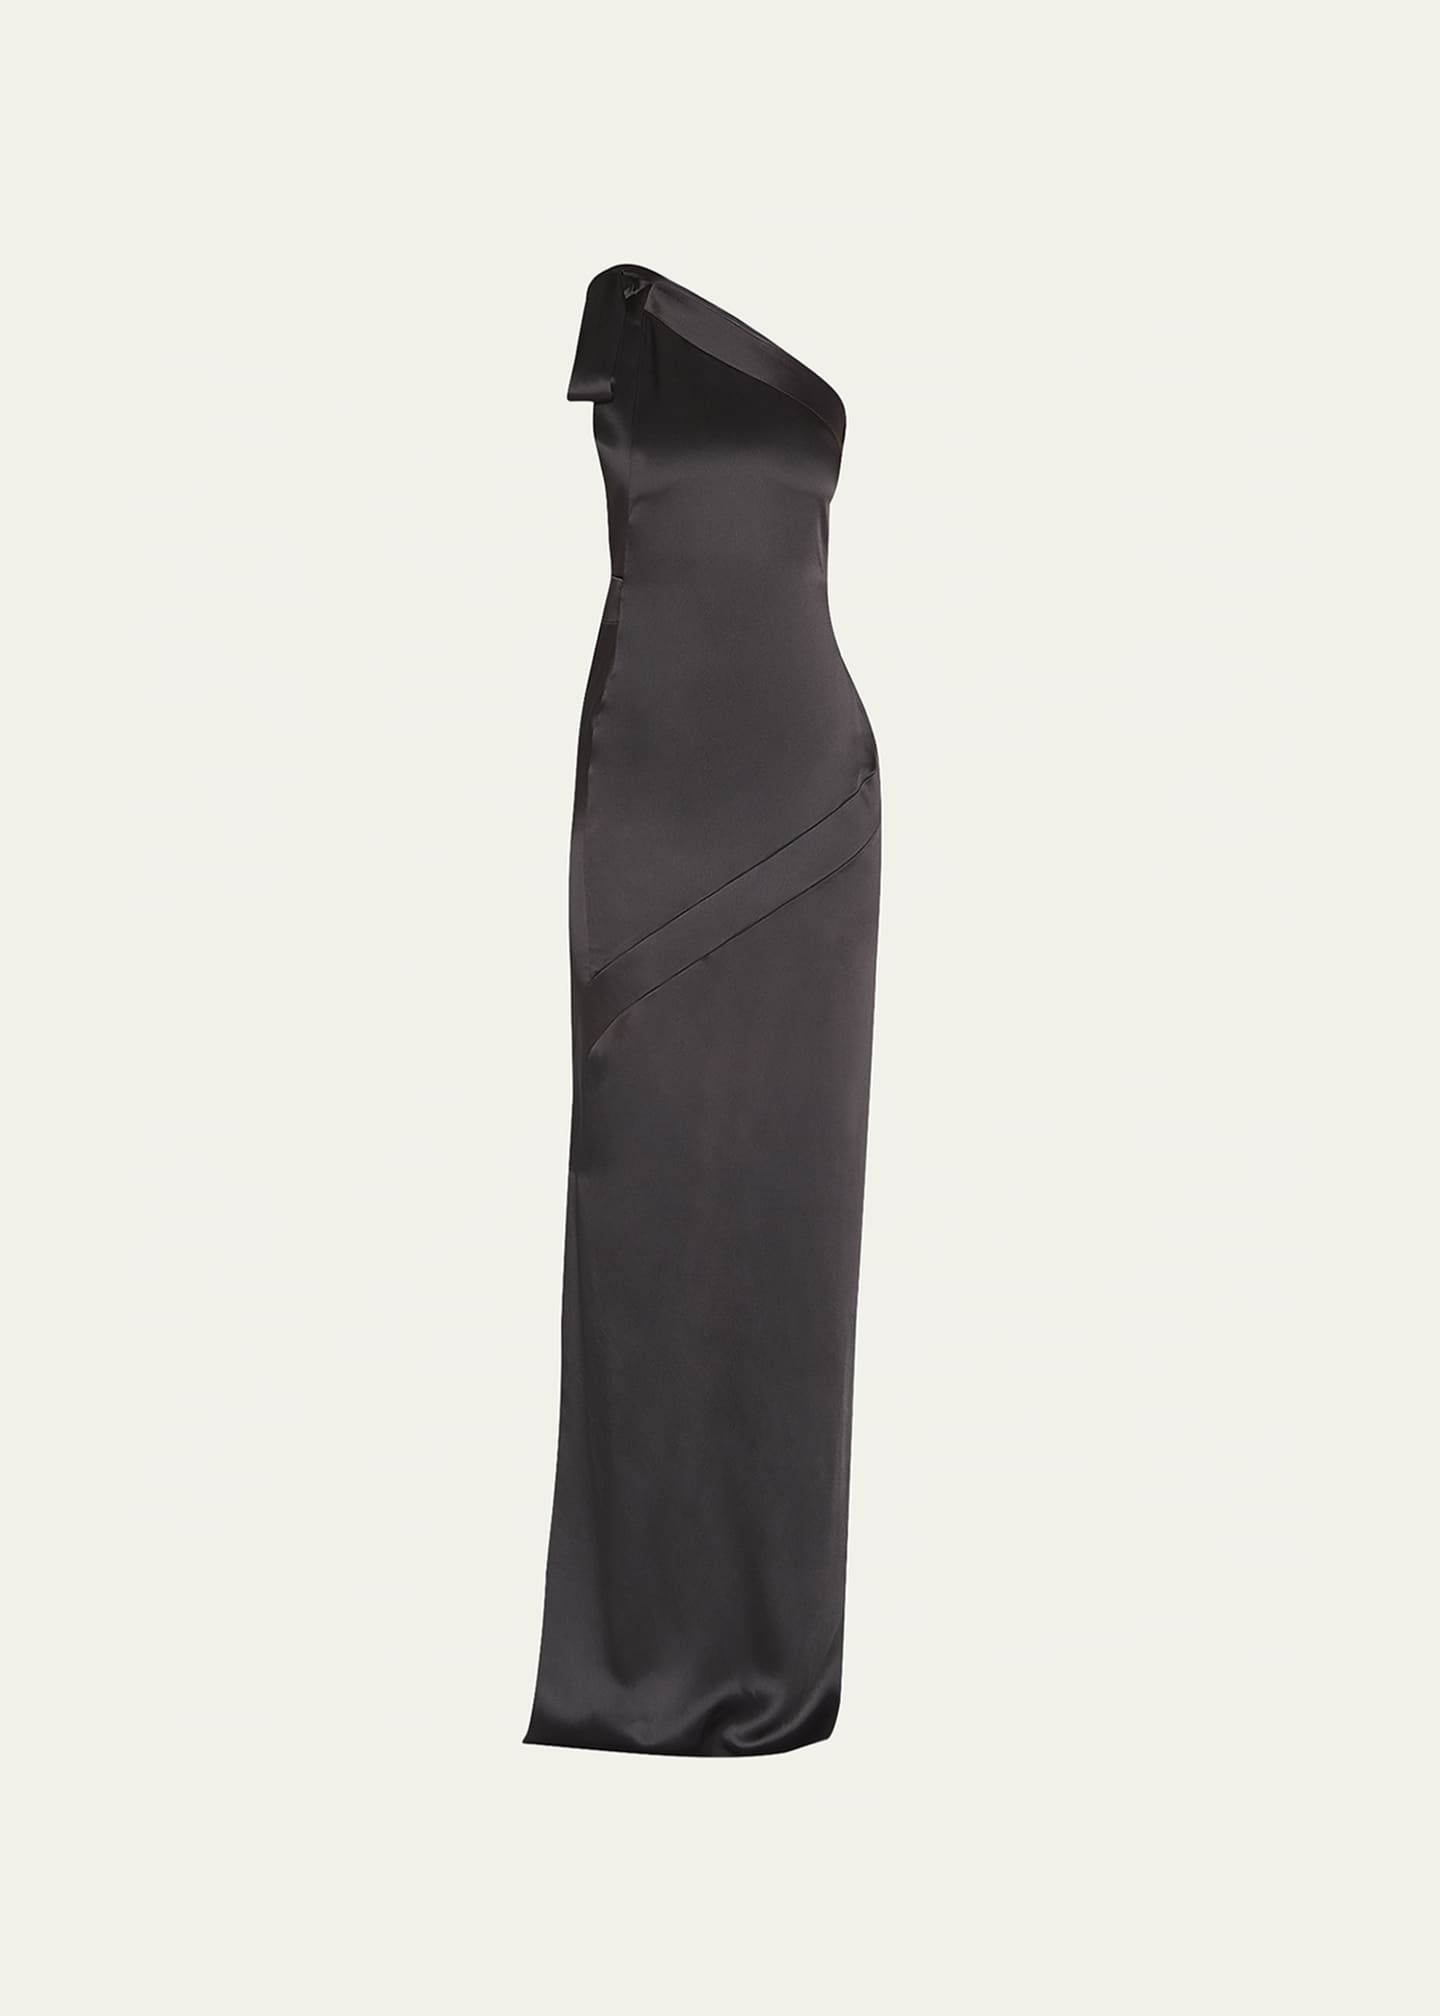 TOM FORD One-Shoulder Bow Satin Gown - Bergdorf Goodman